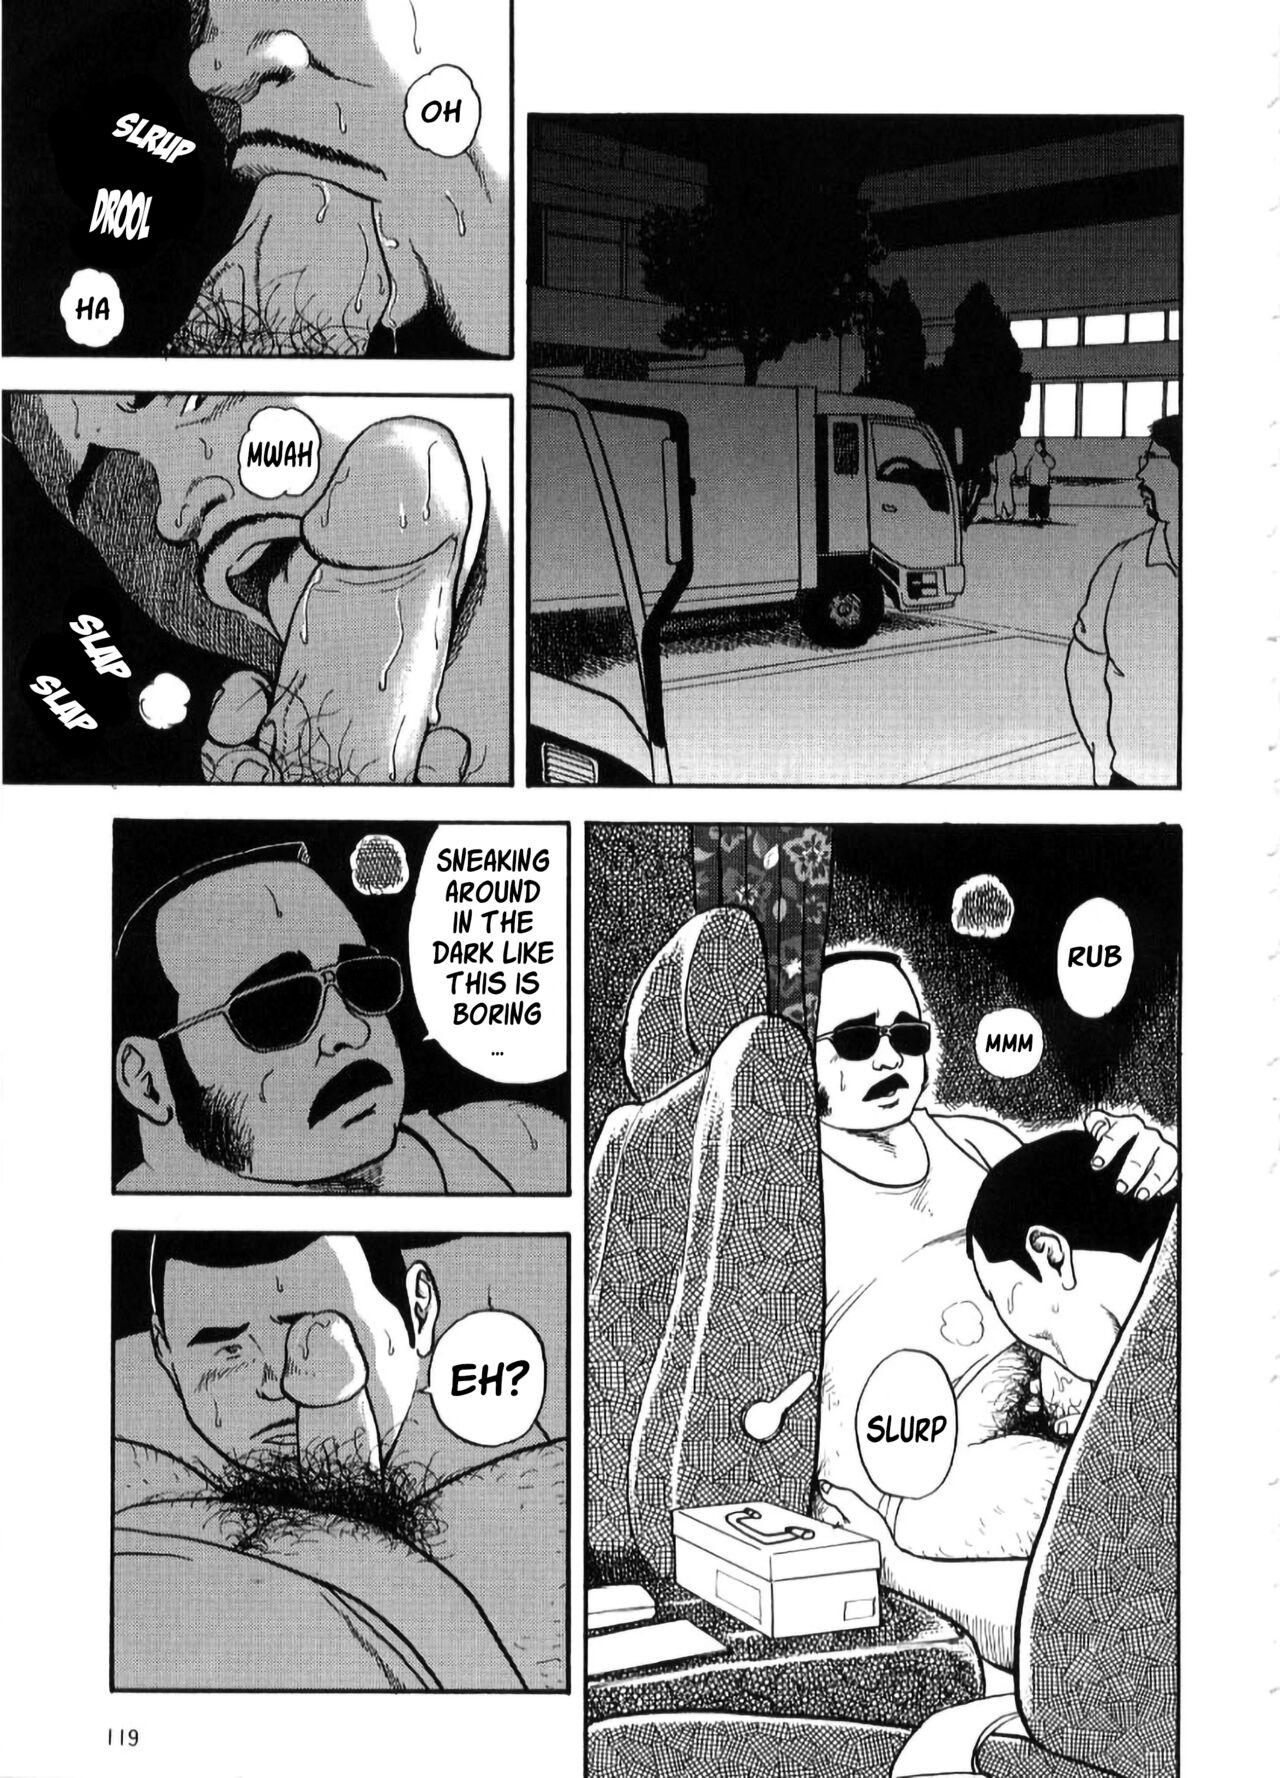 Blowing I Like You - Man in the Passenger Seat Morocha - Page 7